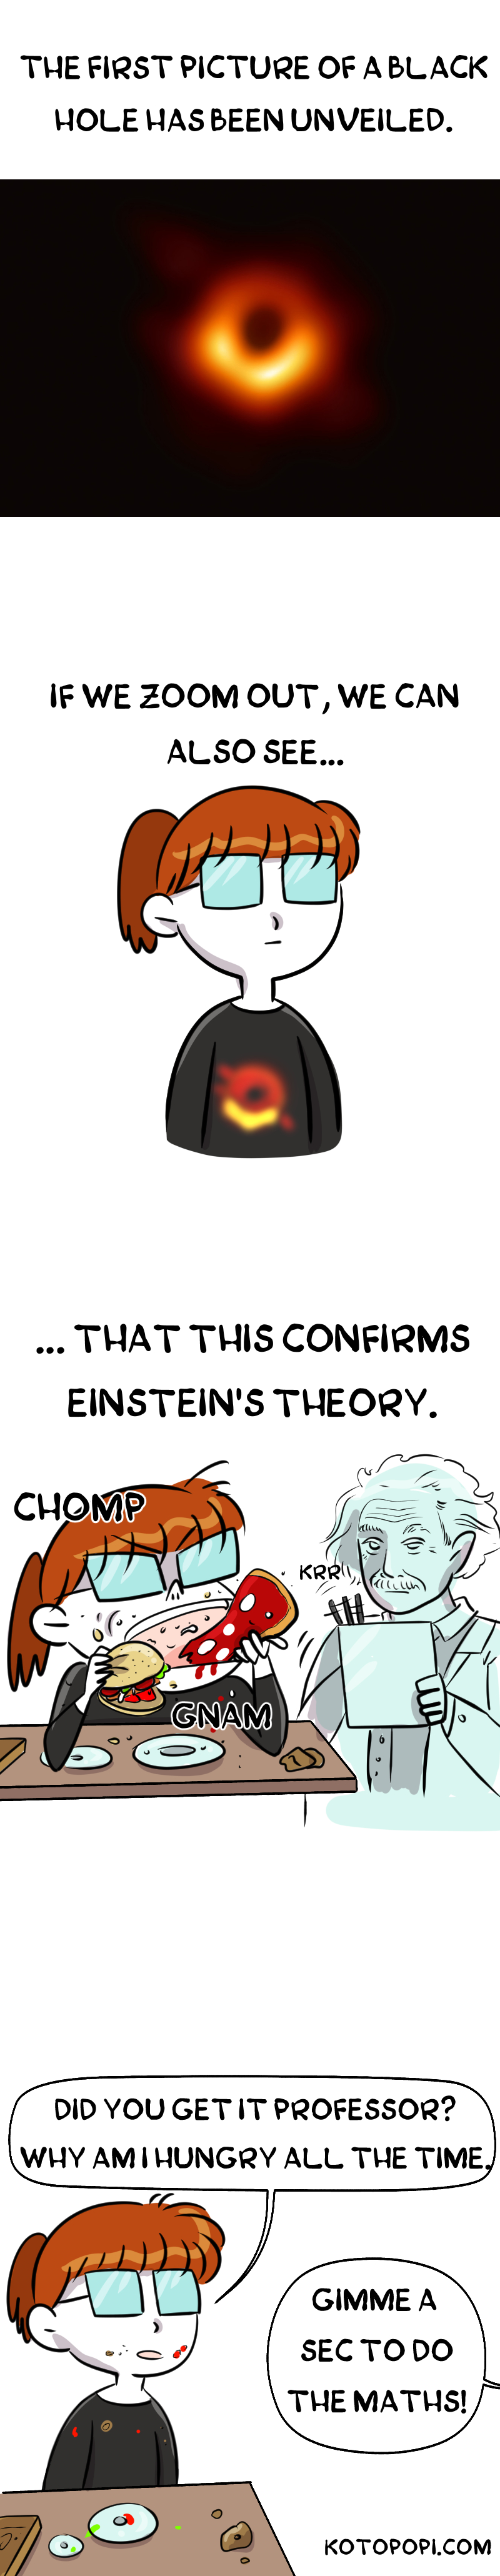 black hole picture einstein proven relativity theory